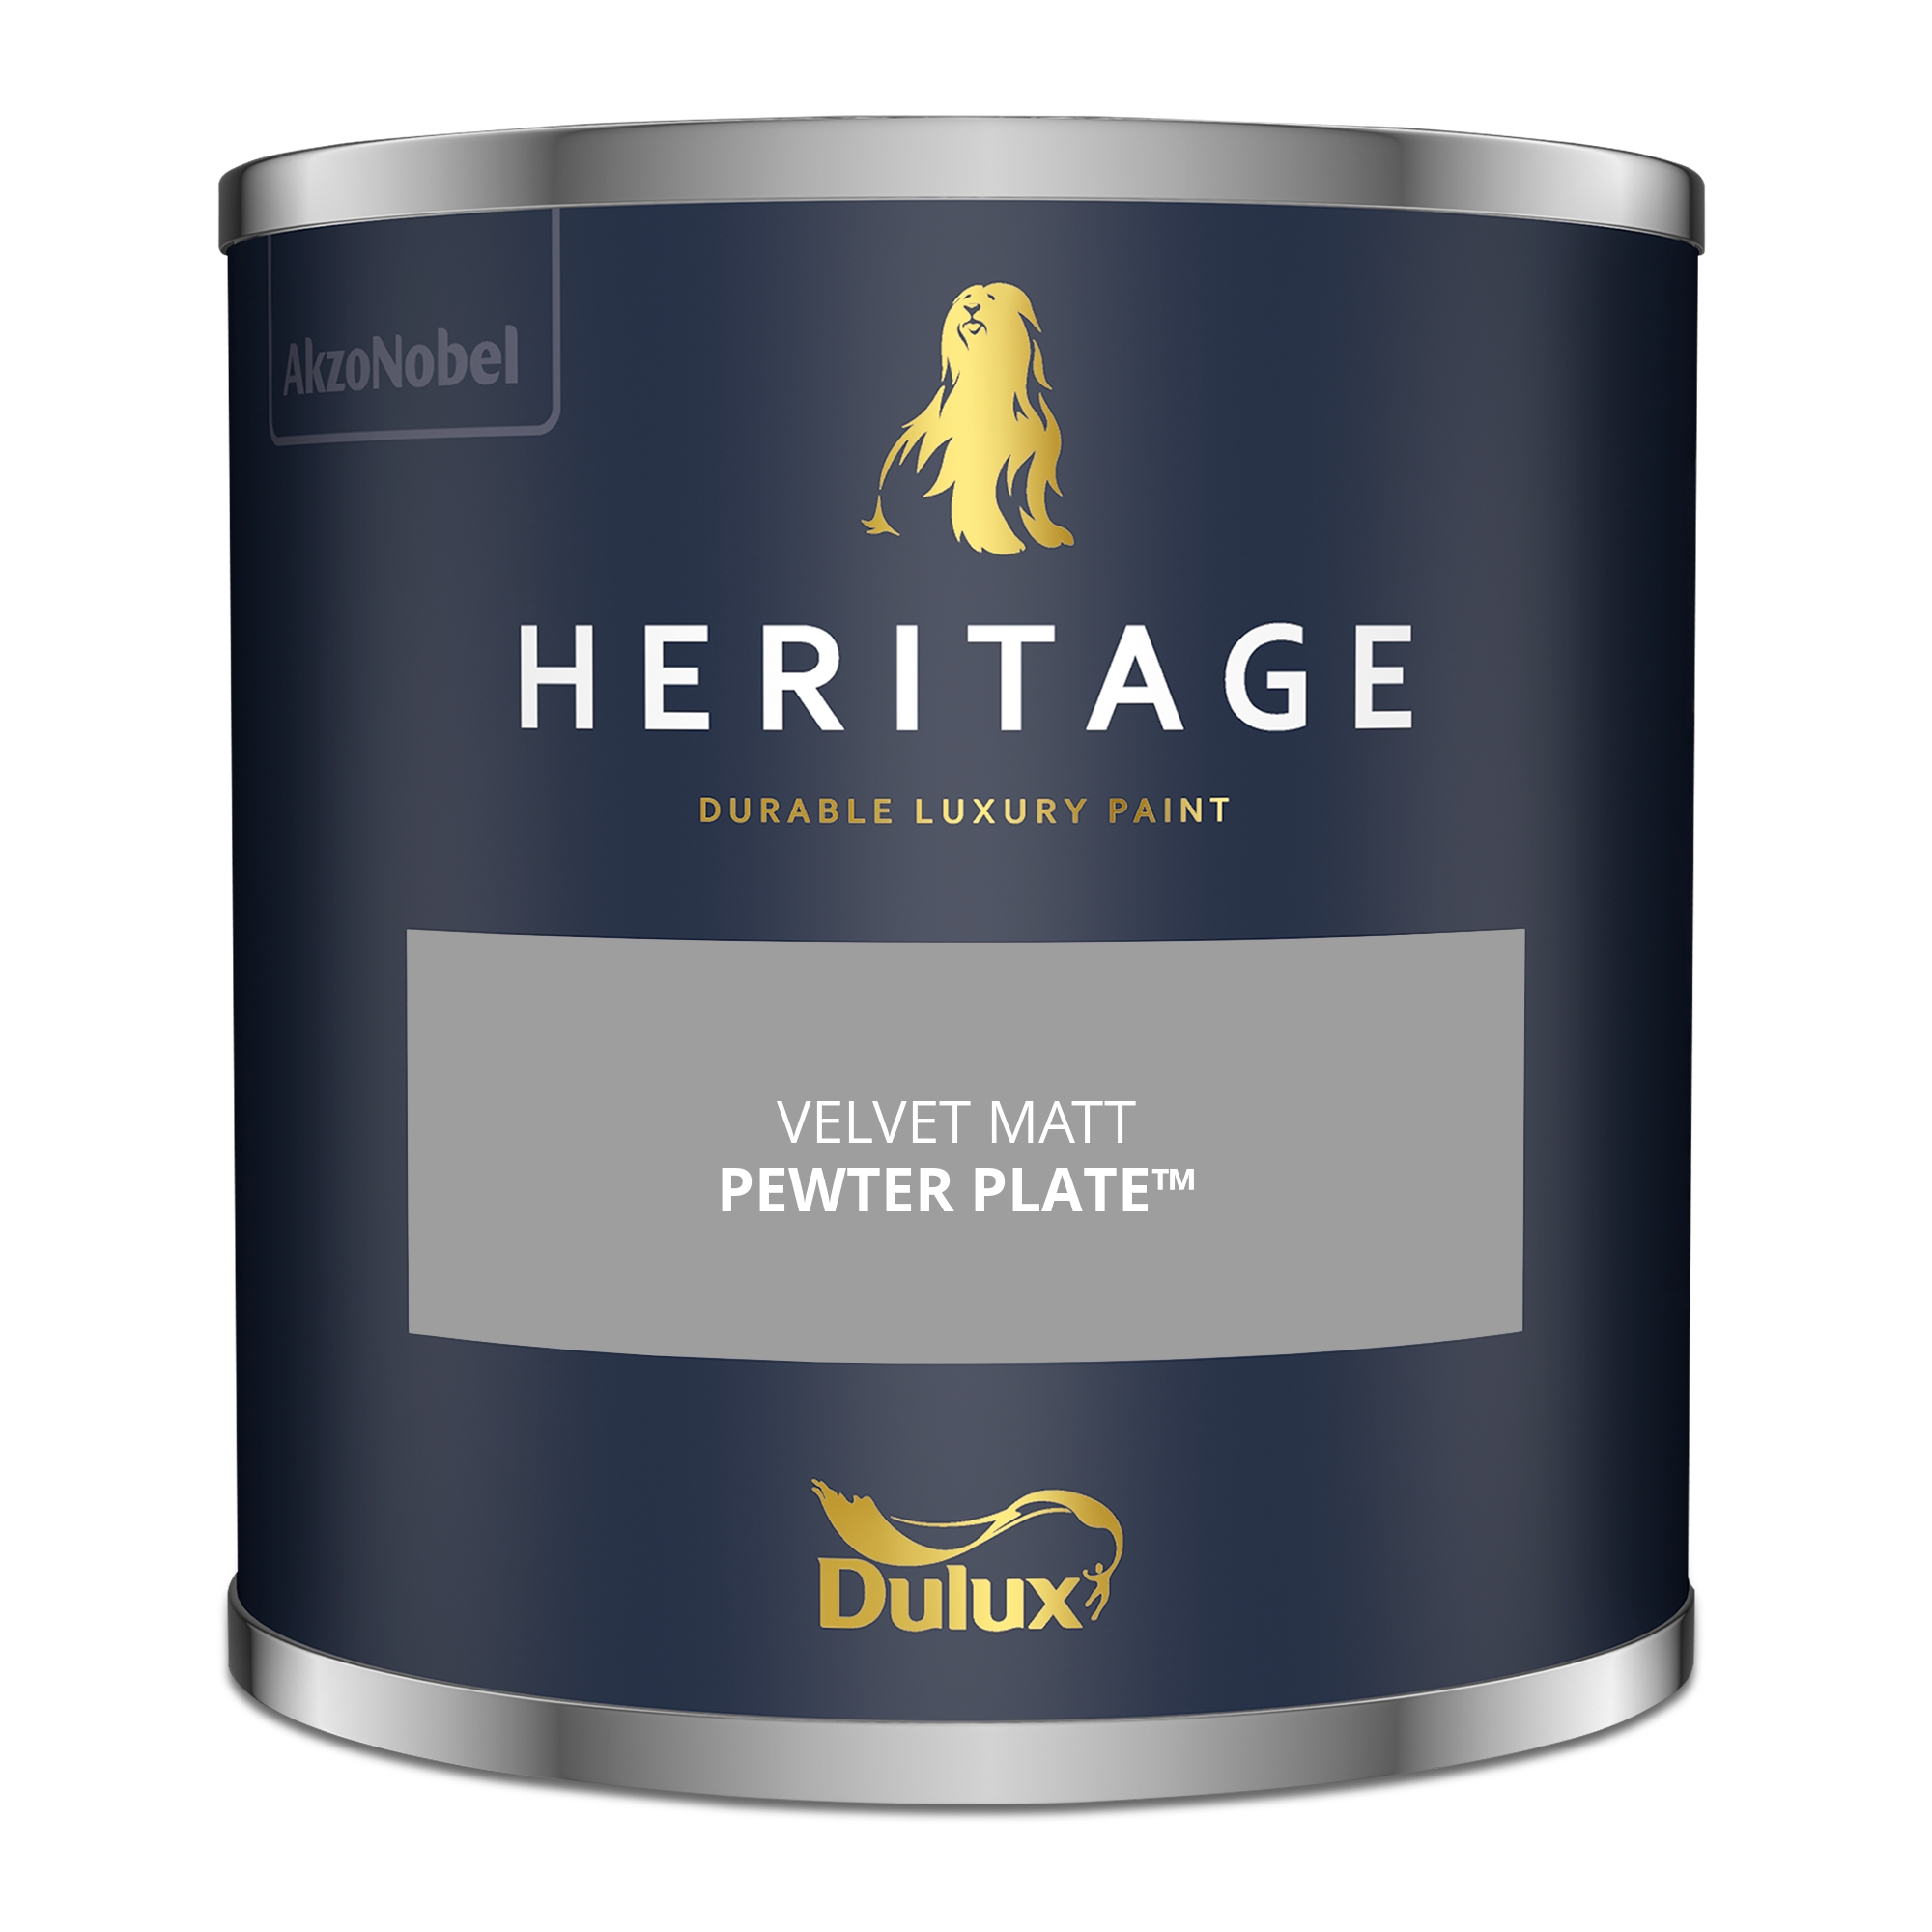 Dulux Heritage Tester Pewter Plate 125ml